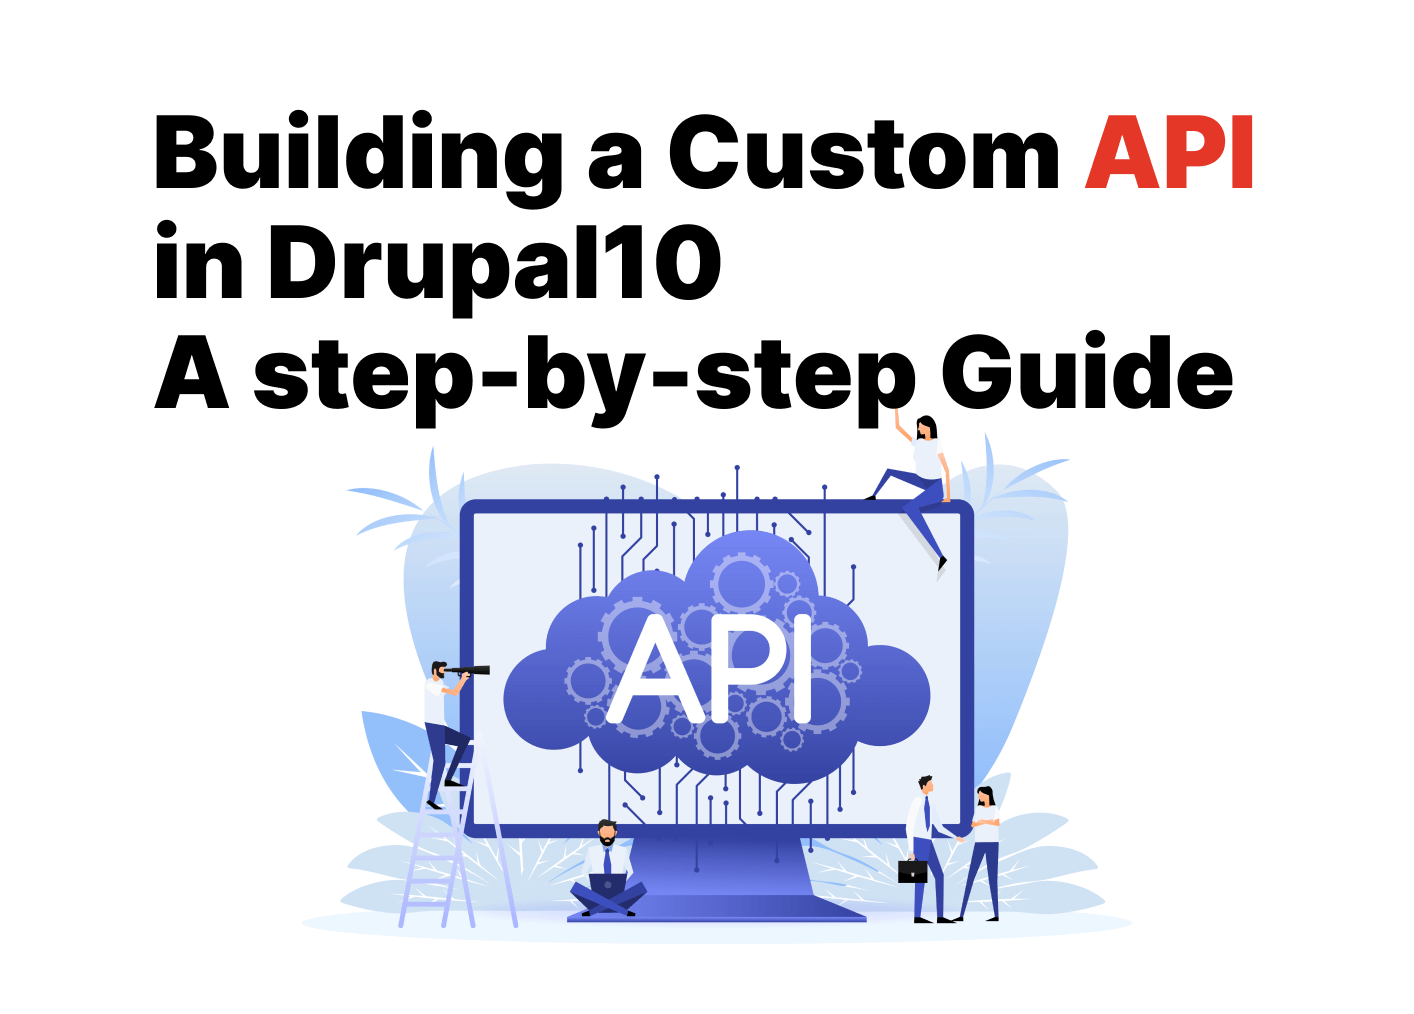 Building a Custom API in Drupal 10: A Step-by-Step Guide image